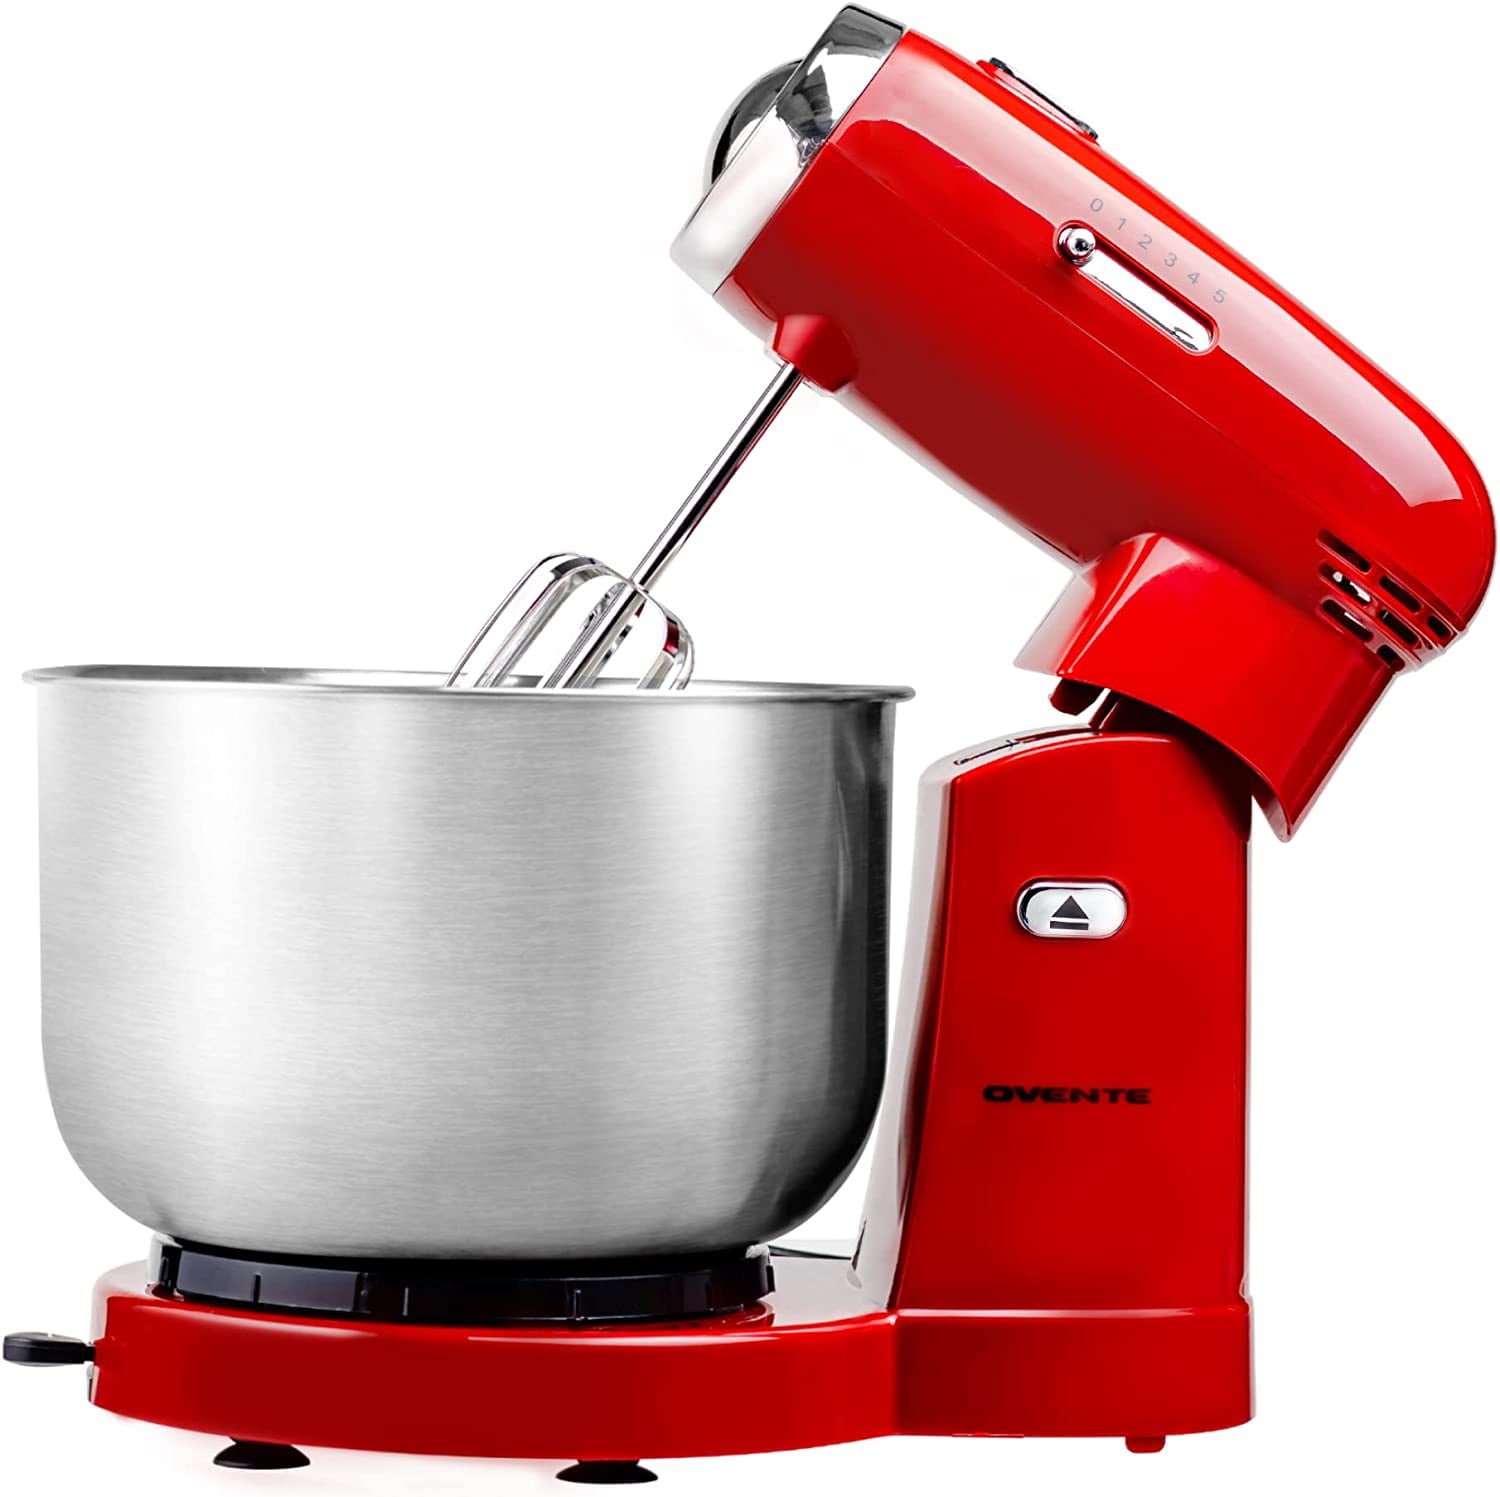 How To Use The Blender Attachment - Bosch Mixers USA